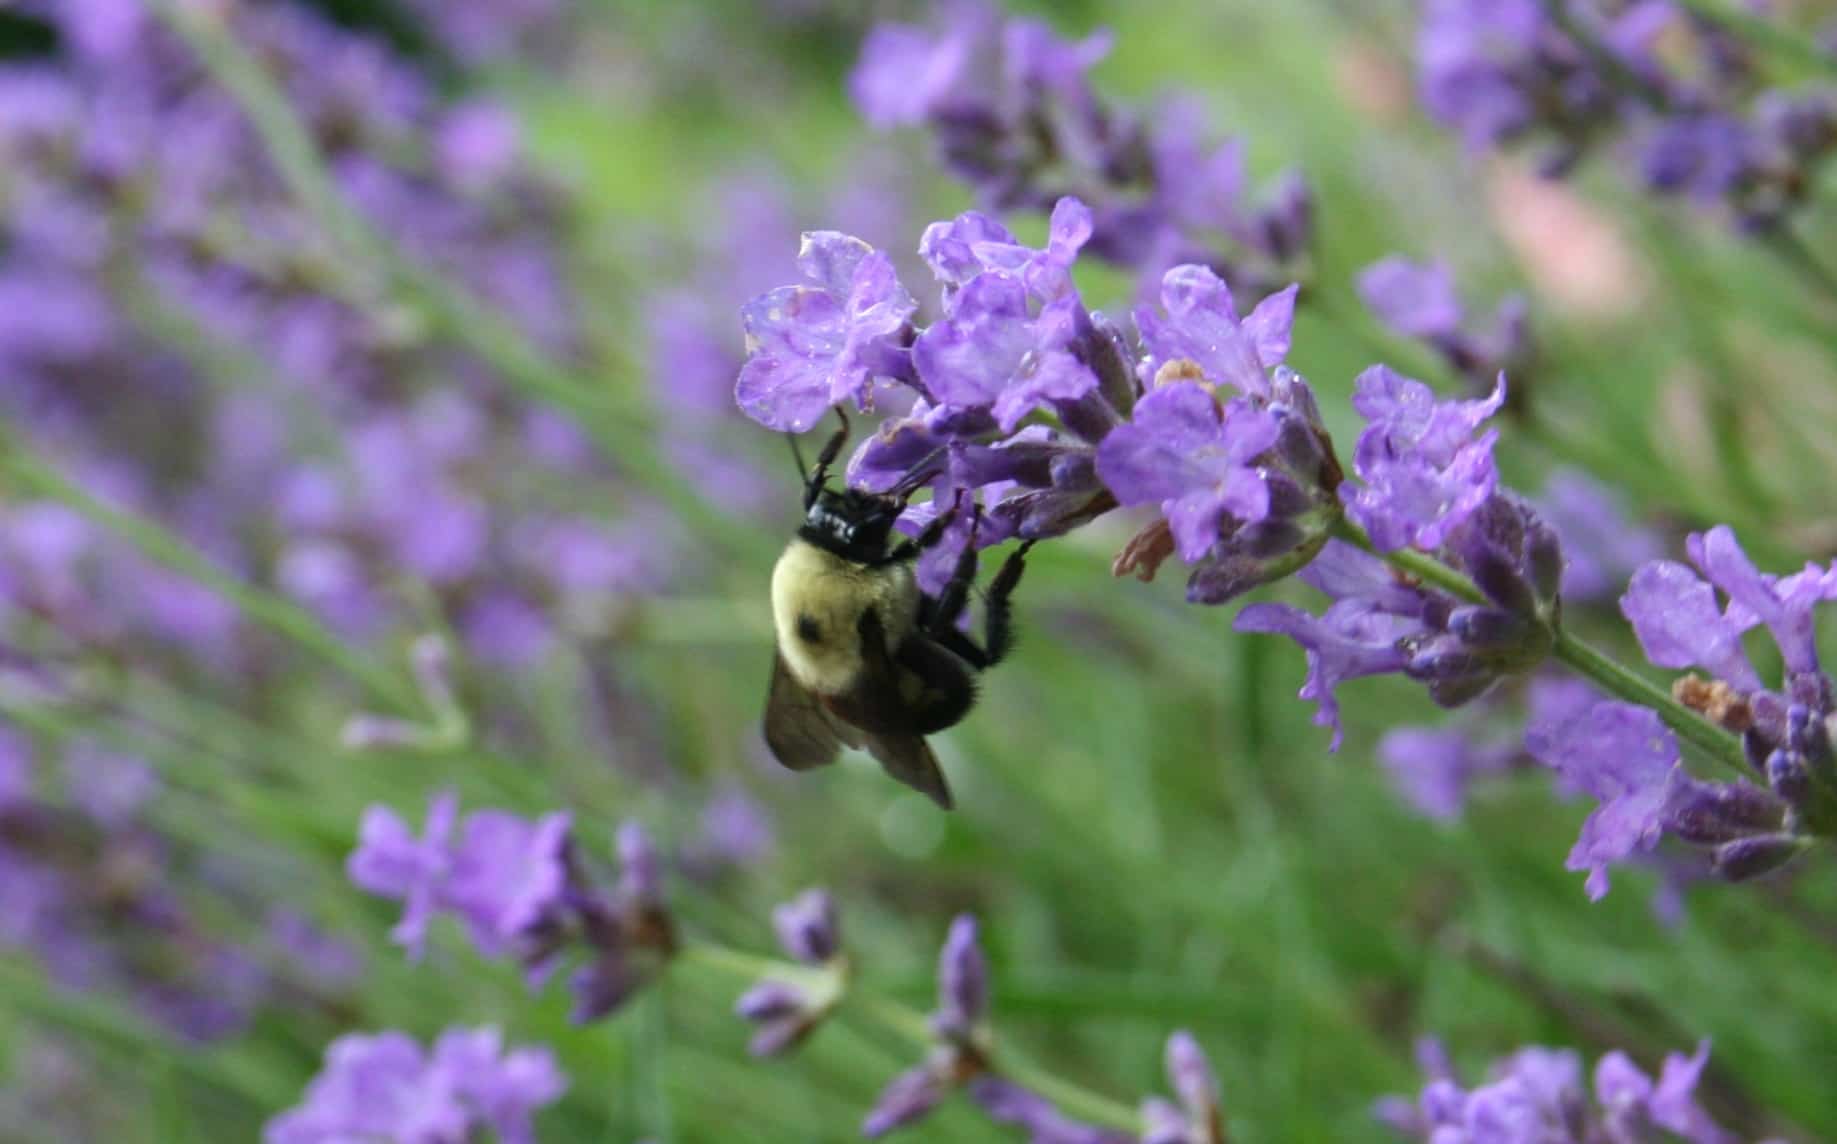 pollinating insect at work - picture of bee on lavender